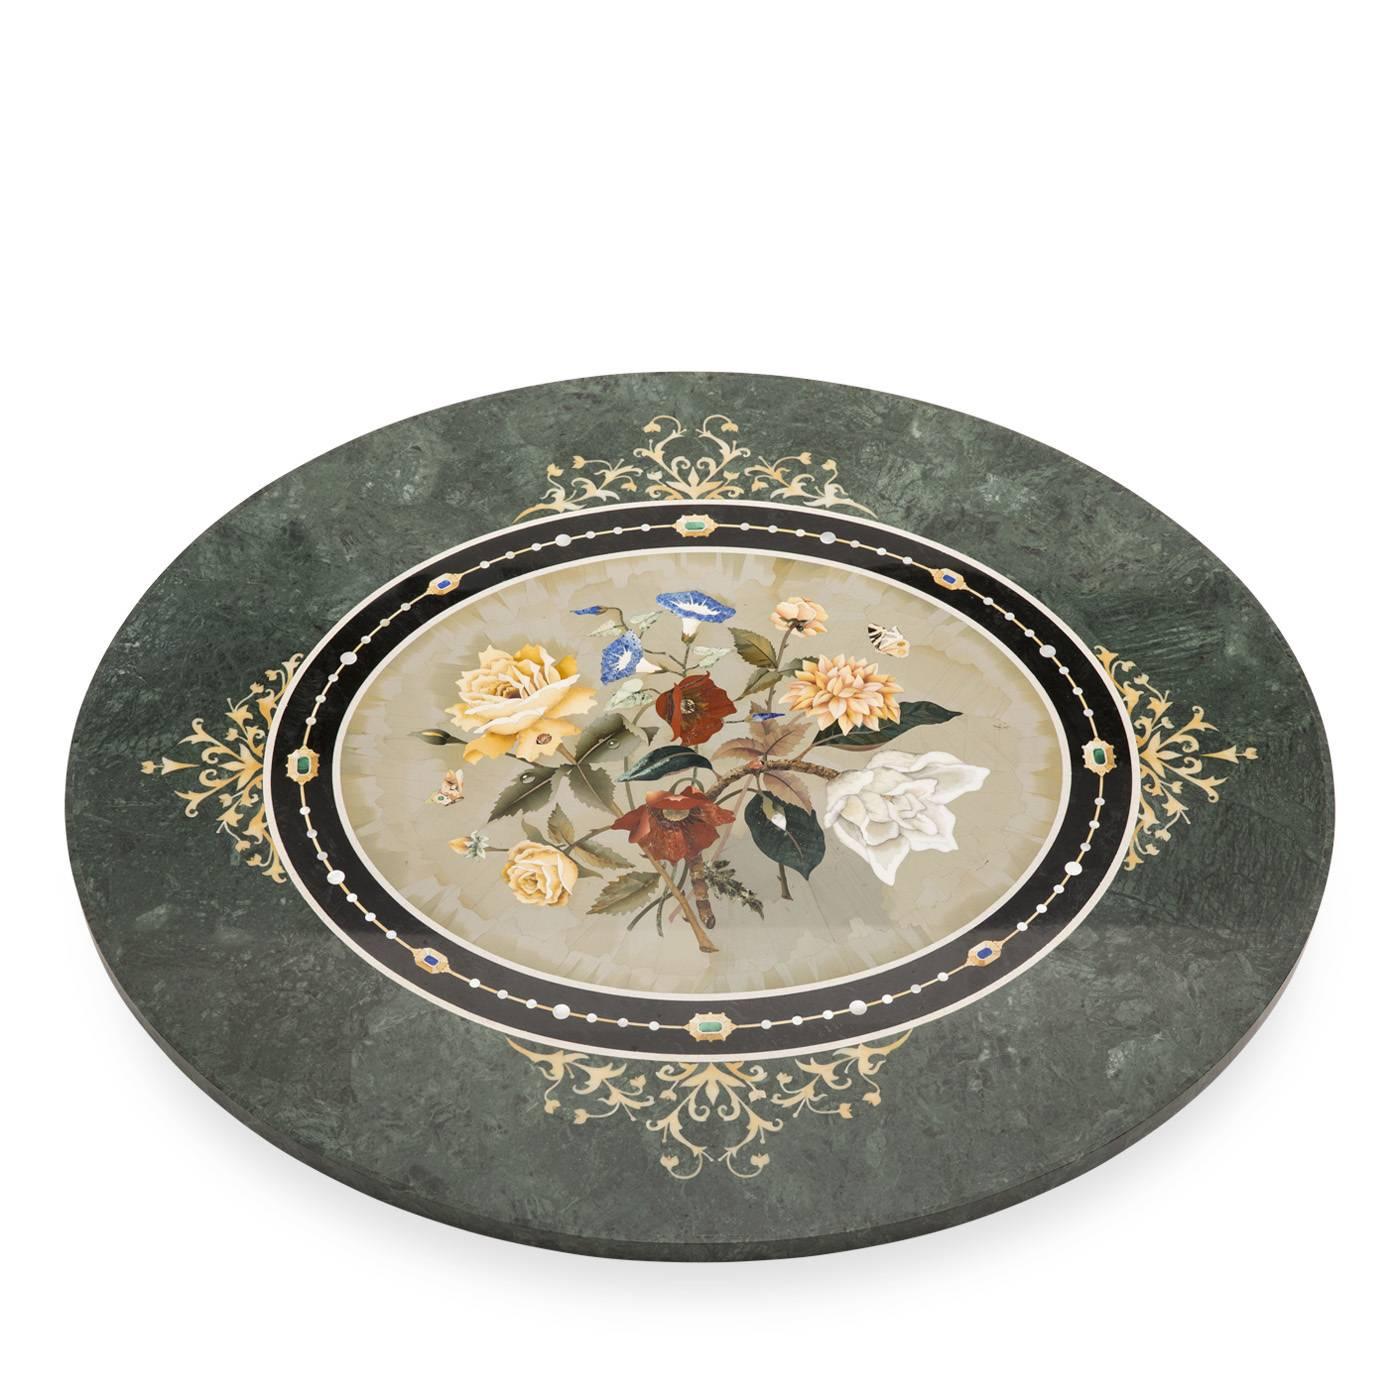 The Traversari brothers demonstrated their stunning craftsmanship in this Florentine mosaic table for which were used green jasper, different semi-precious stones, and pearls. The hand-carved wooden base, gilded with 23.75-karat gold leaf, combines